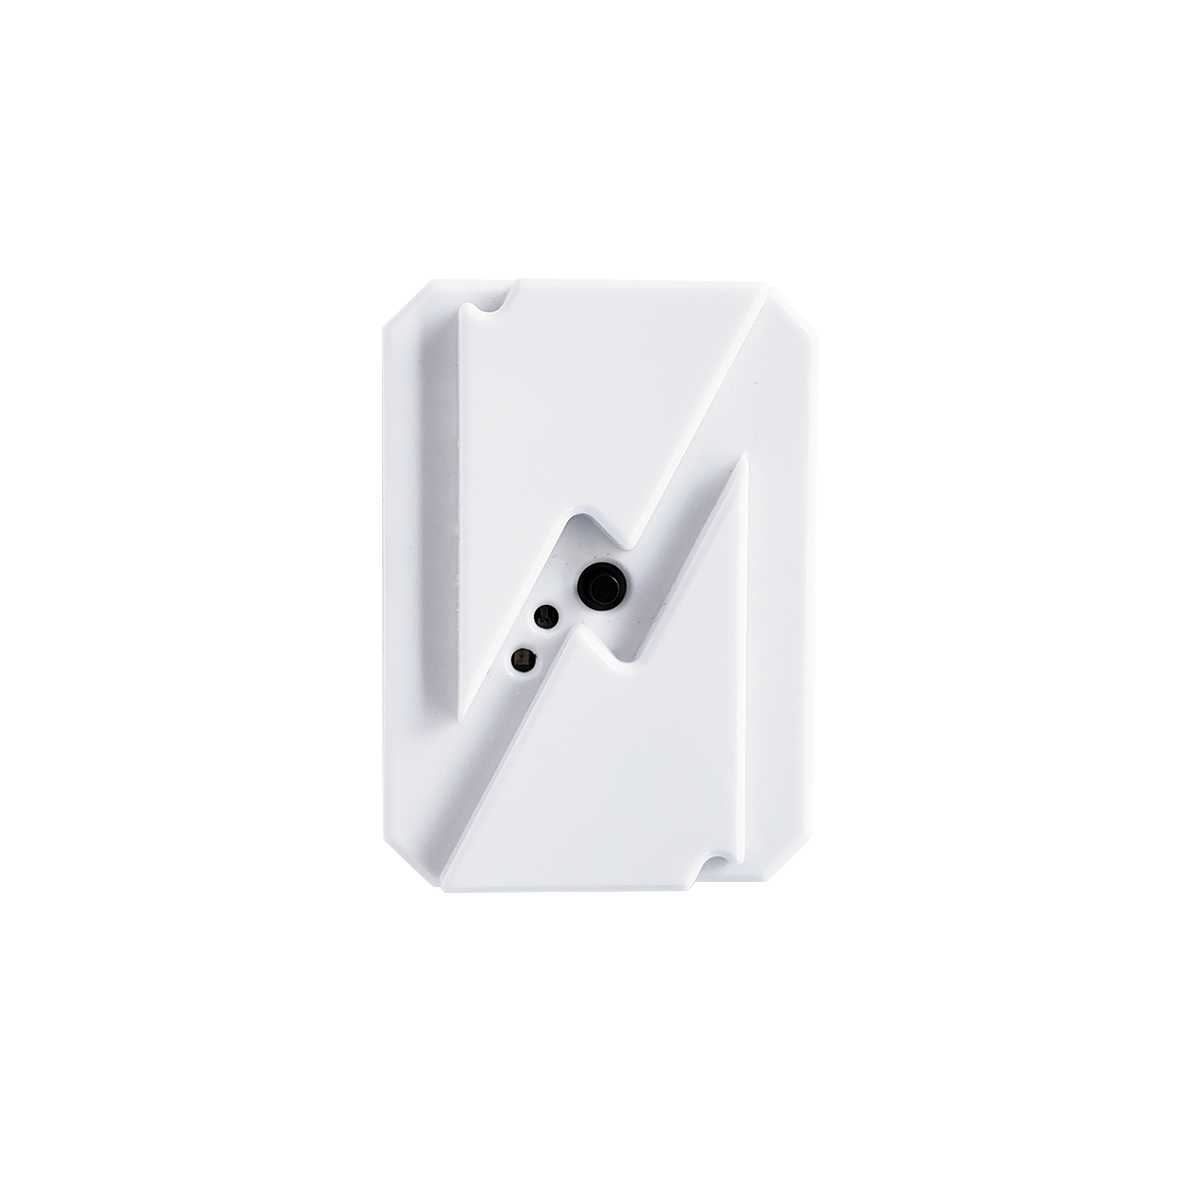 Top view of the Charge-Check, a universal adapter that protects Lithium-Ion batteries from overcharge and battery swelling or battery bloating